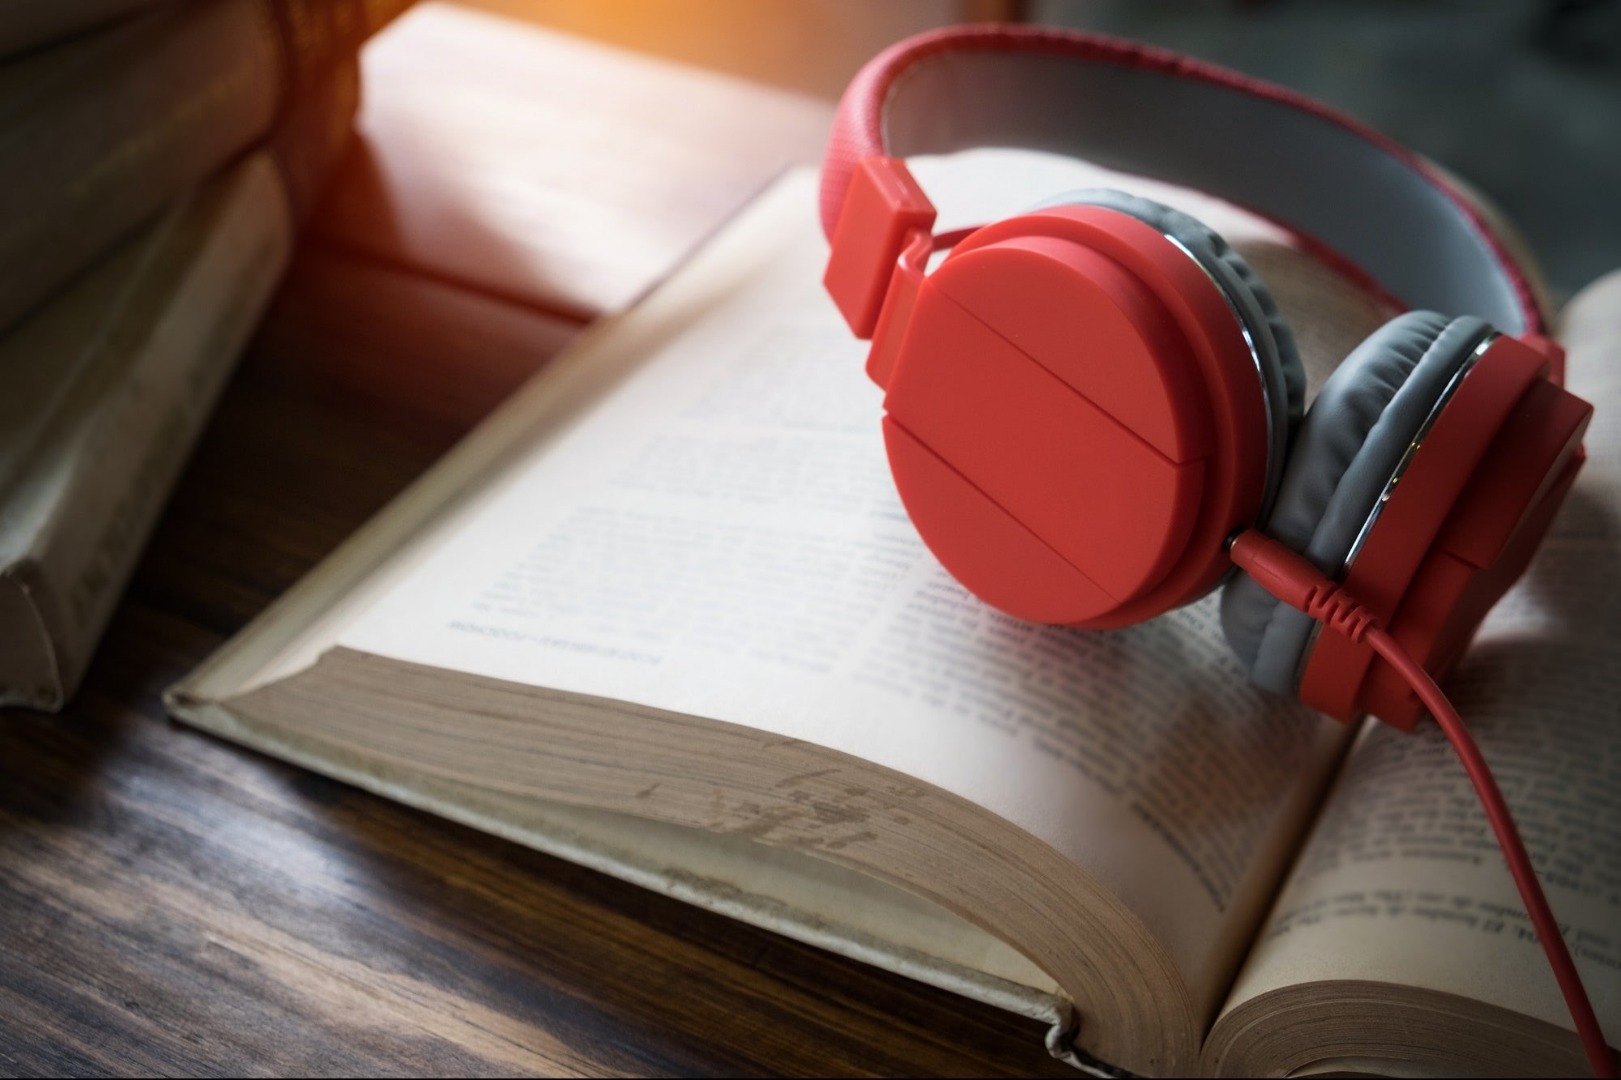 (How to become a good audiobook narrator?)